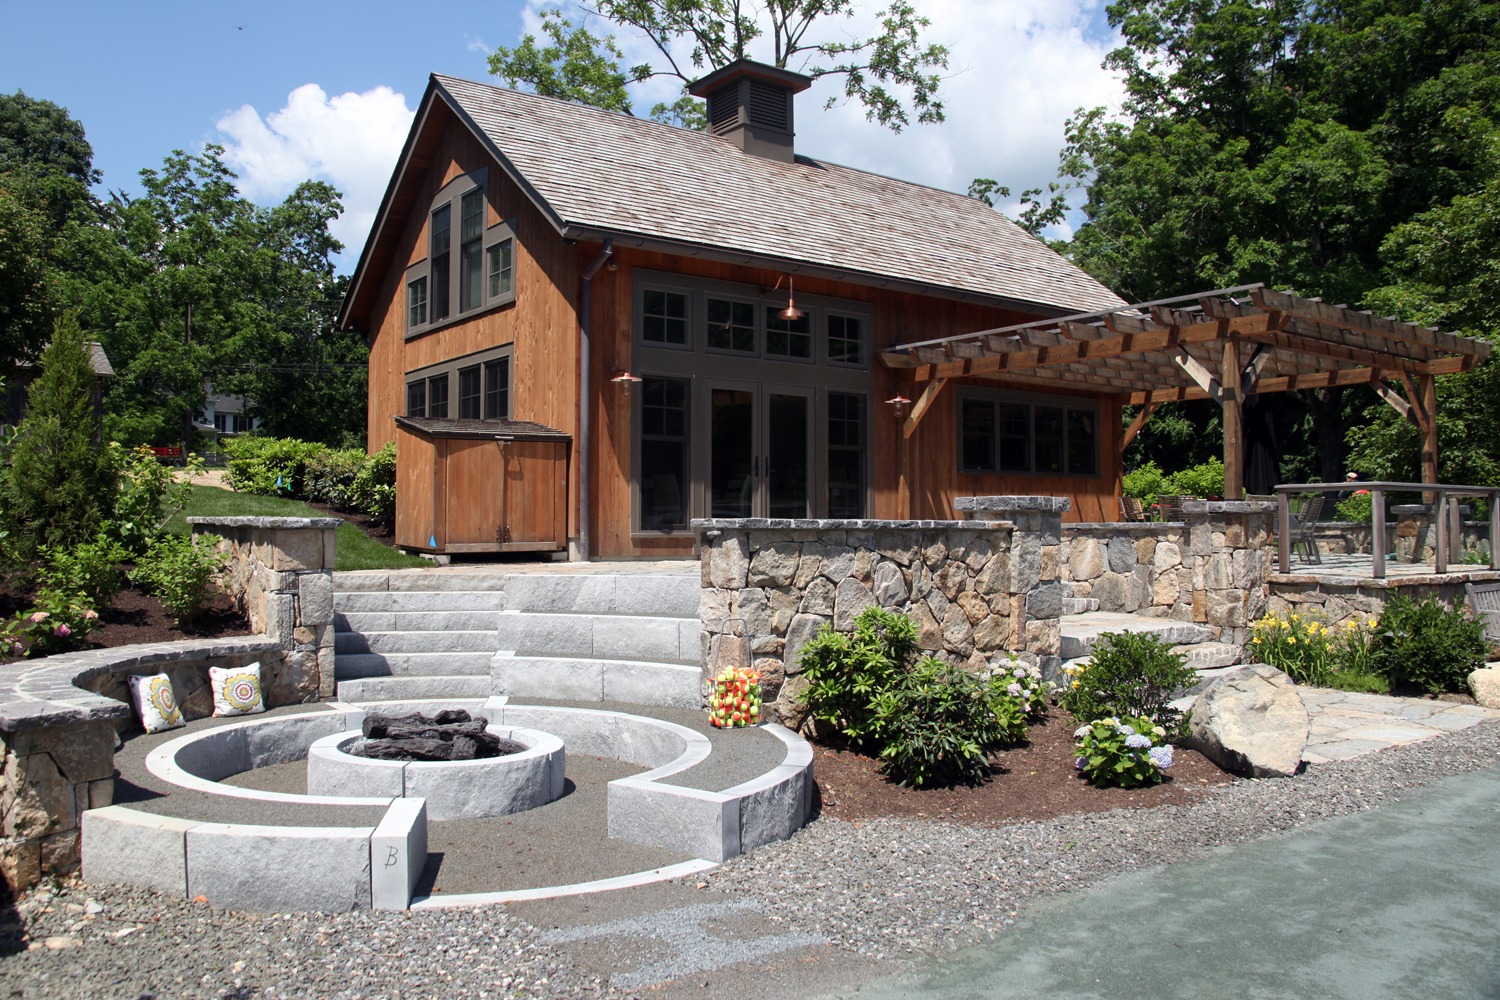 This image features a rustic wooden house with a stone foundation, a pergola, steps leading up to a porch, landscaping, and a circular fire pit.